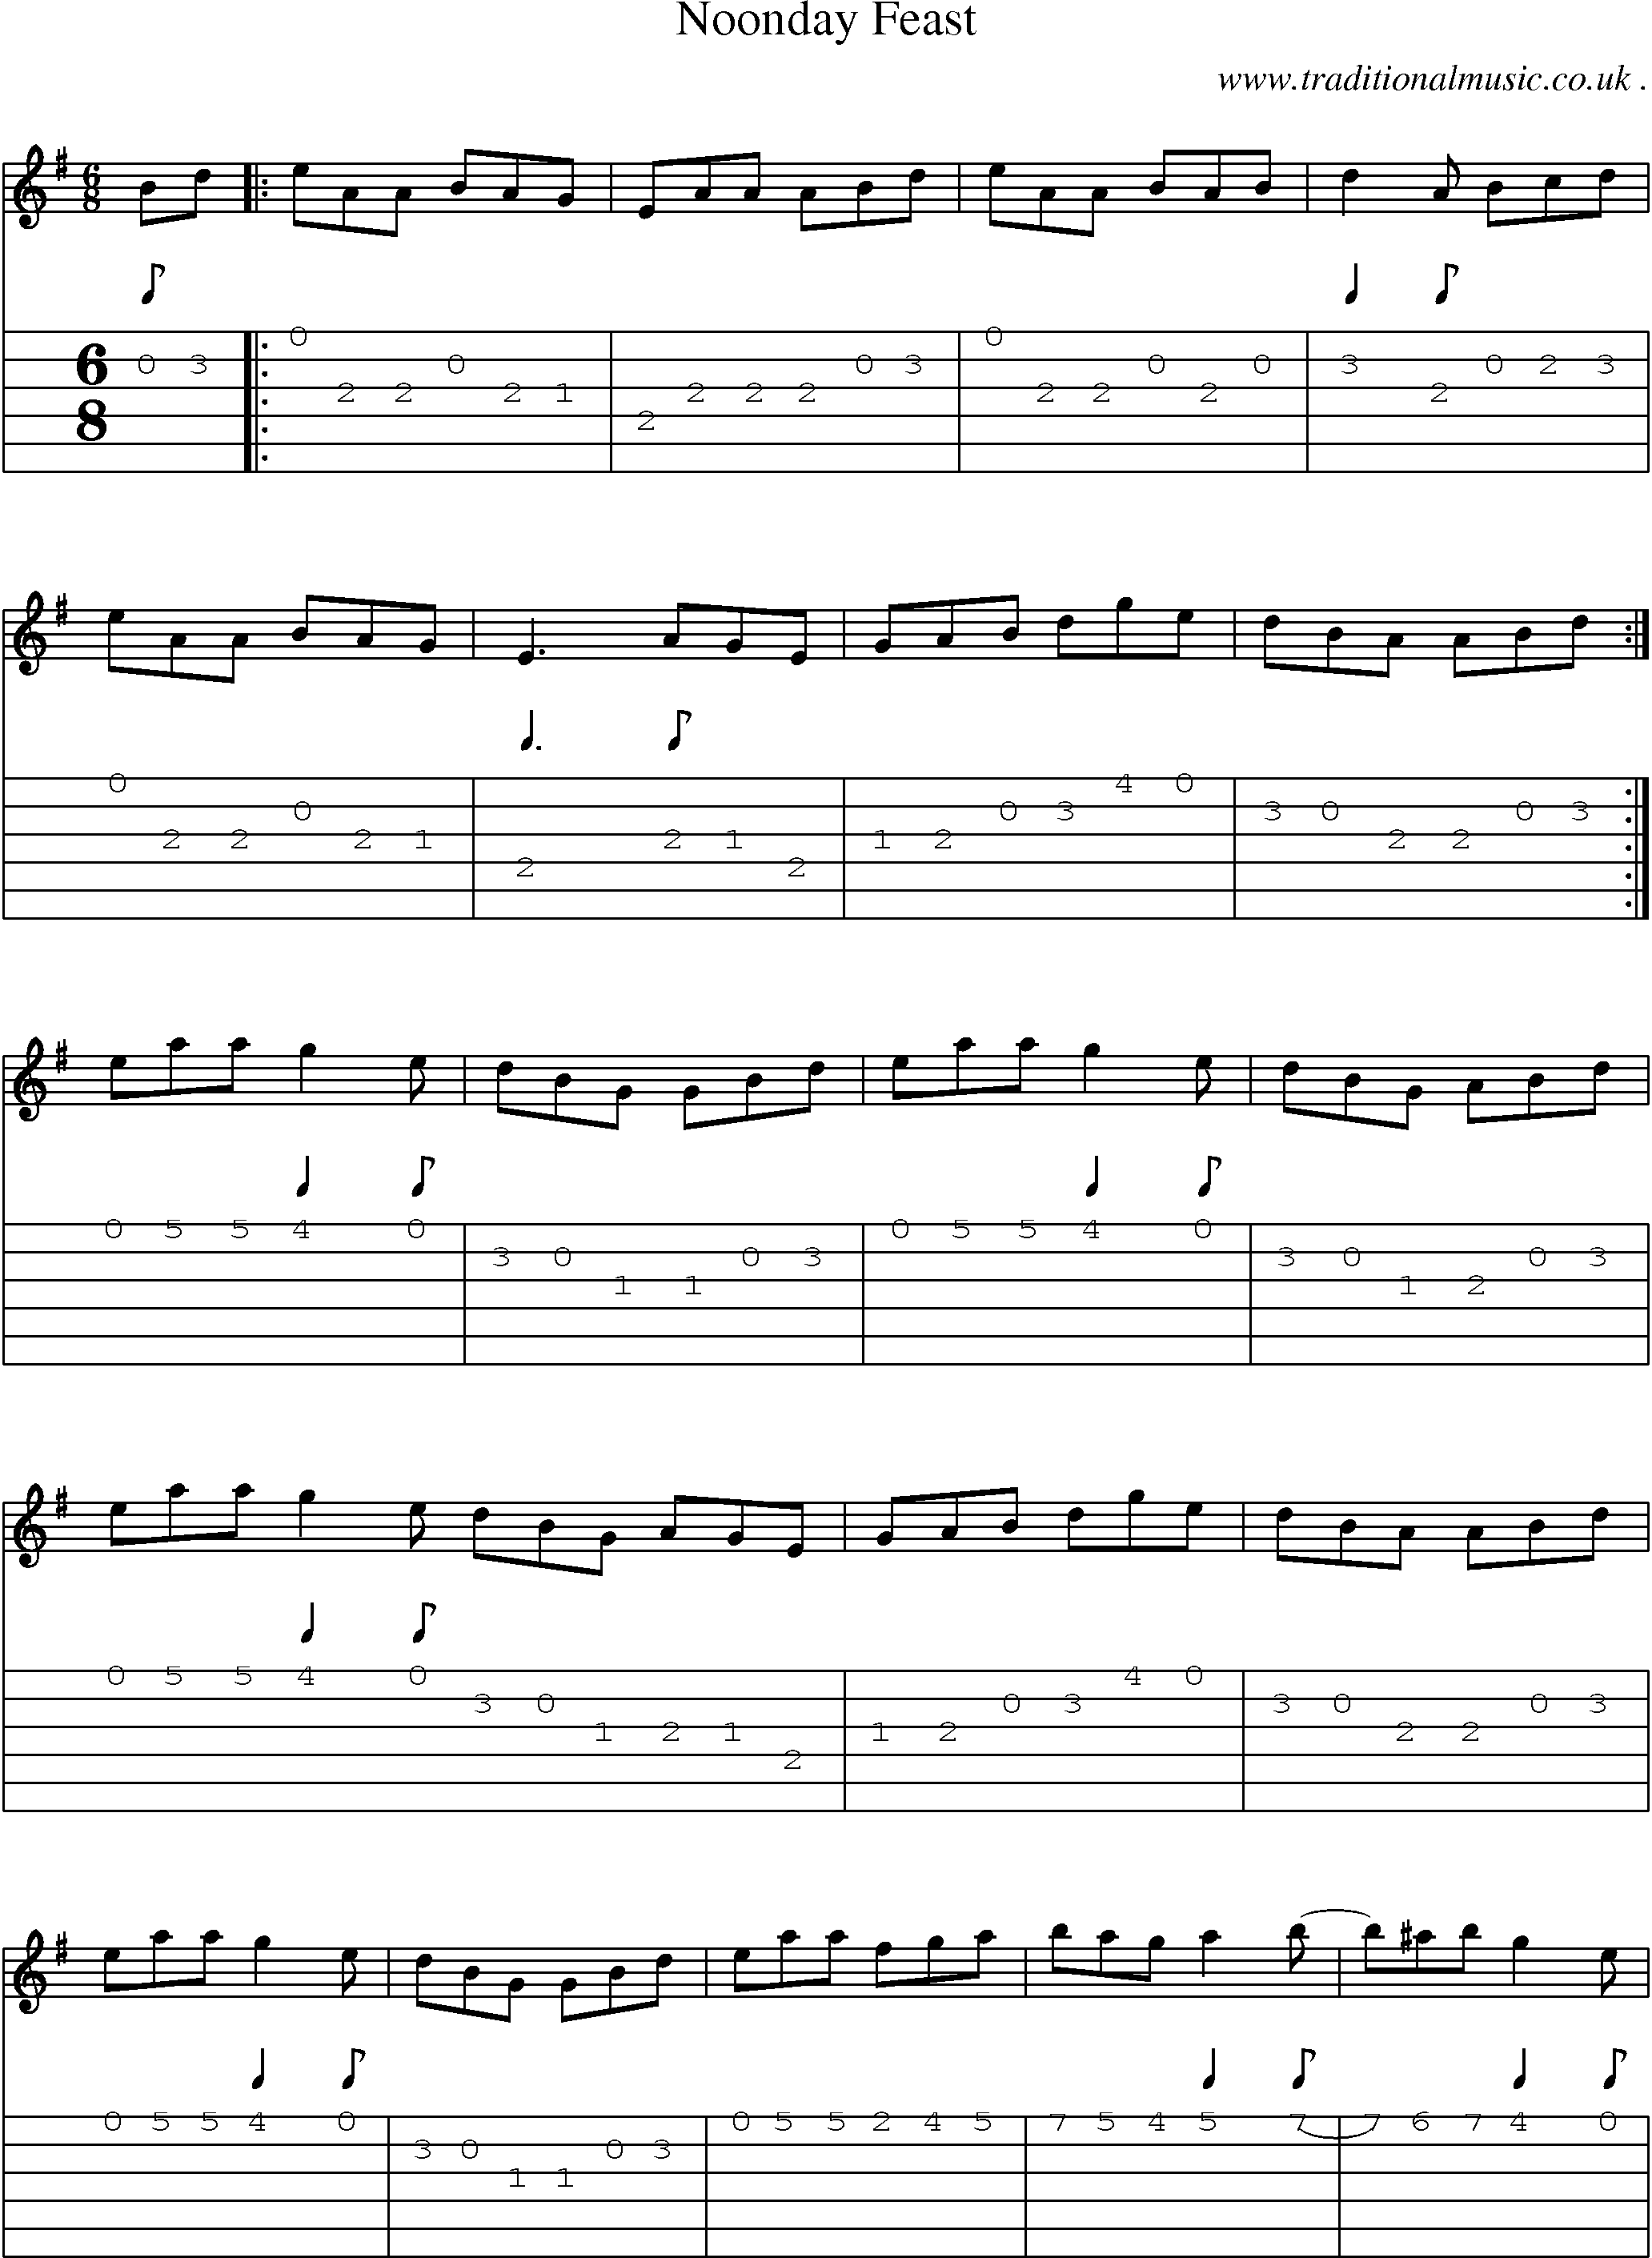 Sheet-Music and Guitar Tabs for Noonday Feast